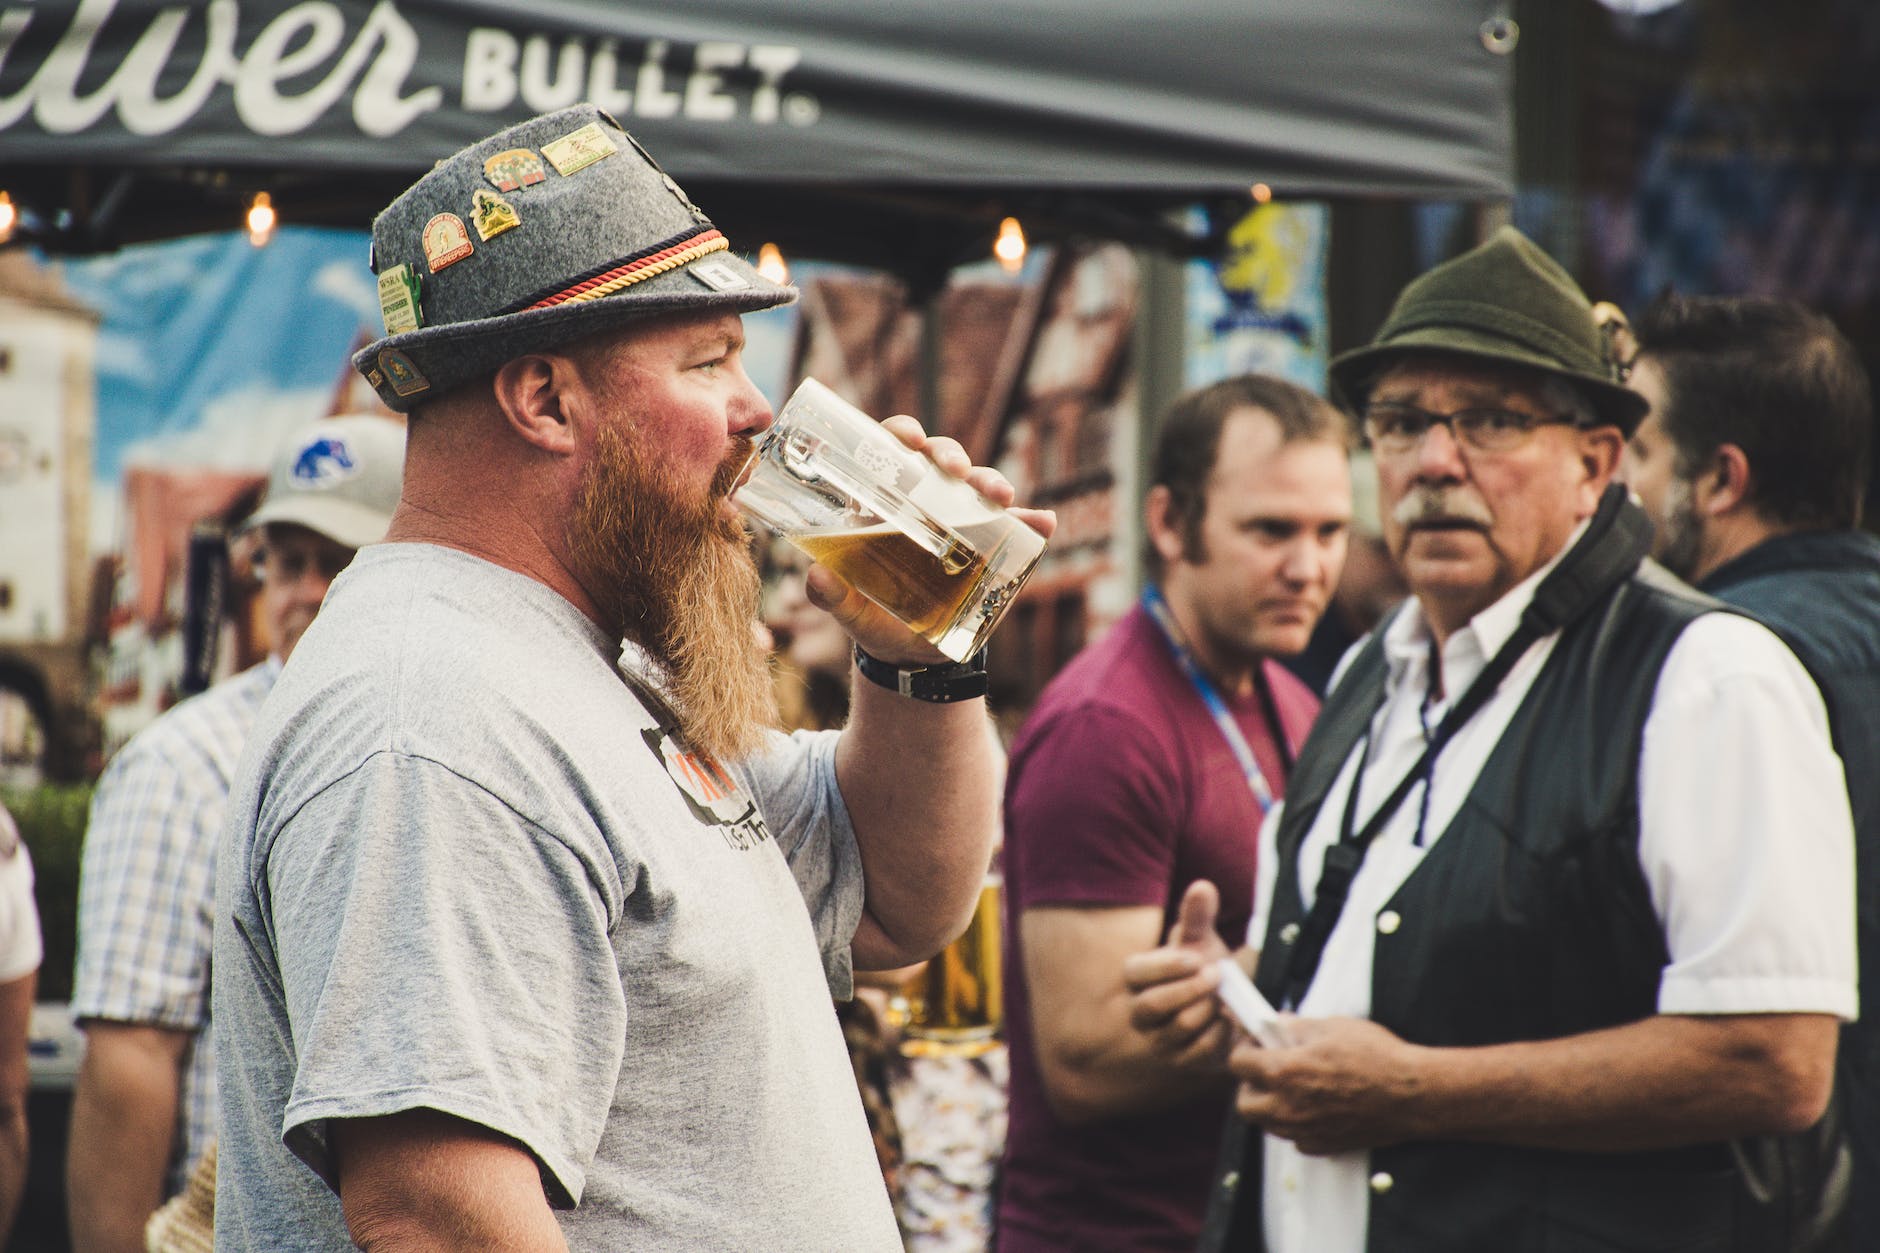 man drinking from a beer pint